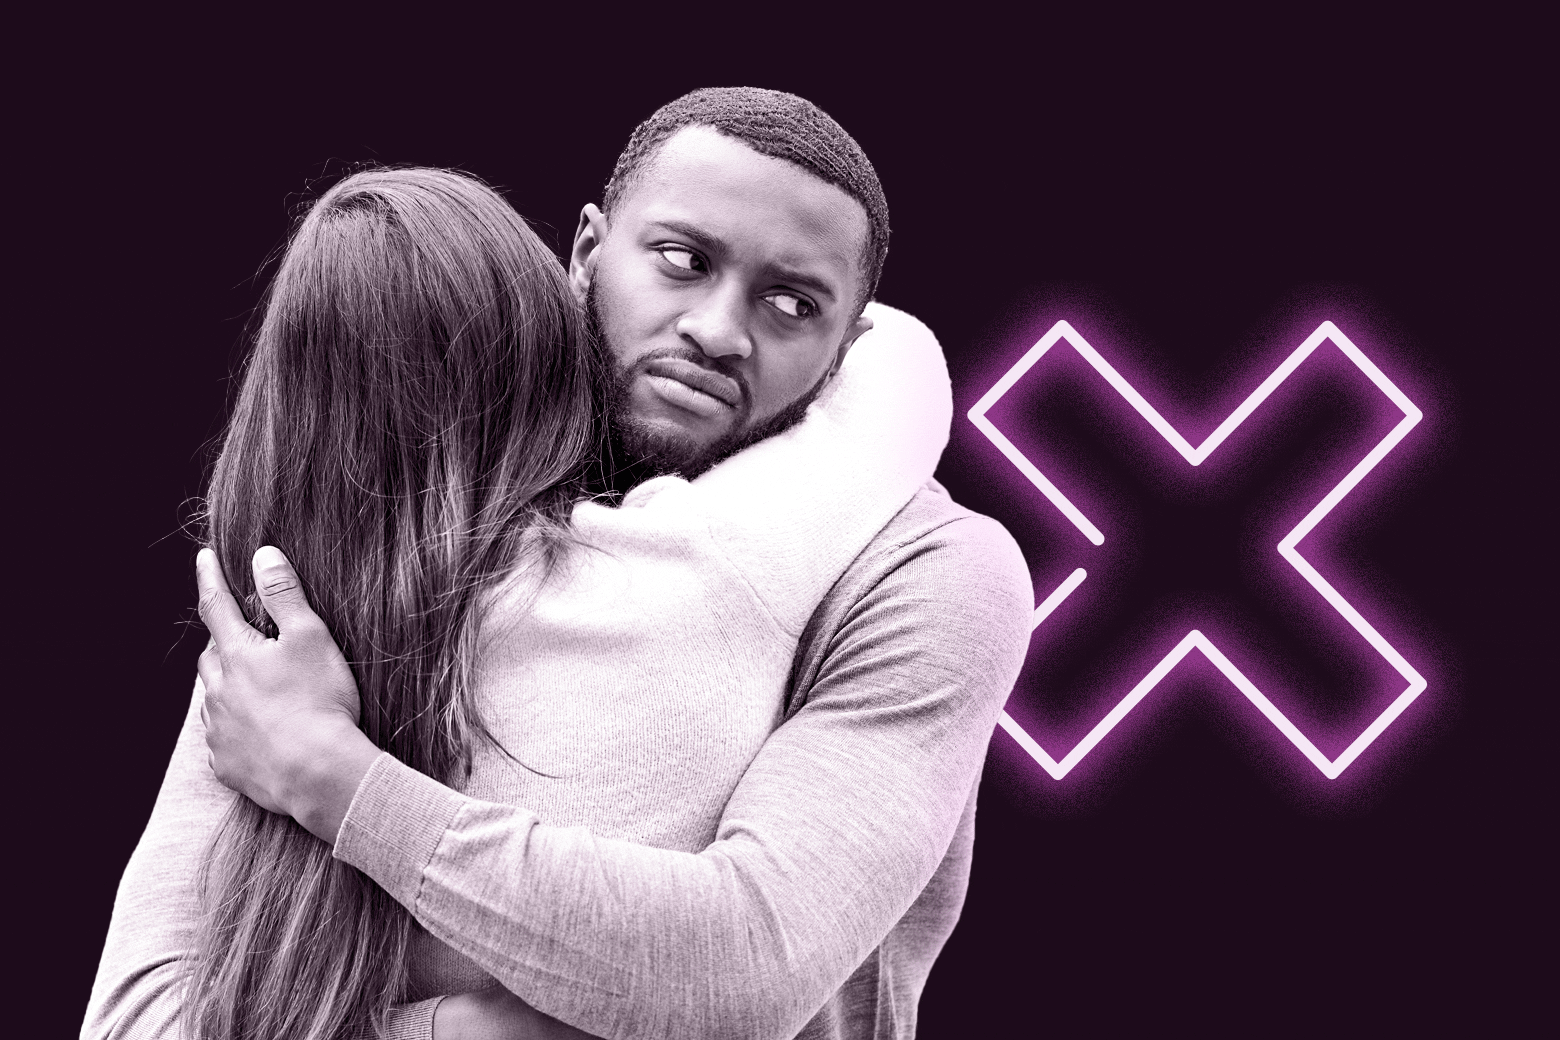 Man and woman hug but the man looks tired and disappointed. A large X floats next to them.